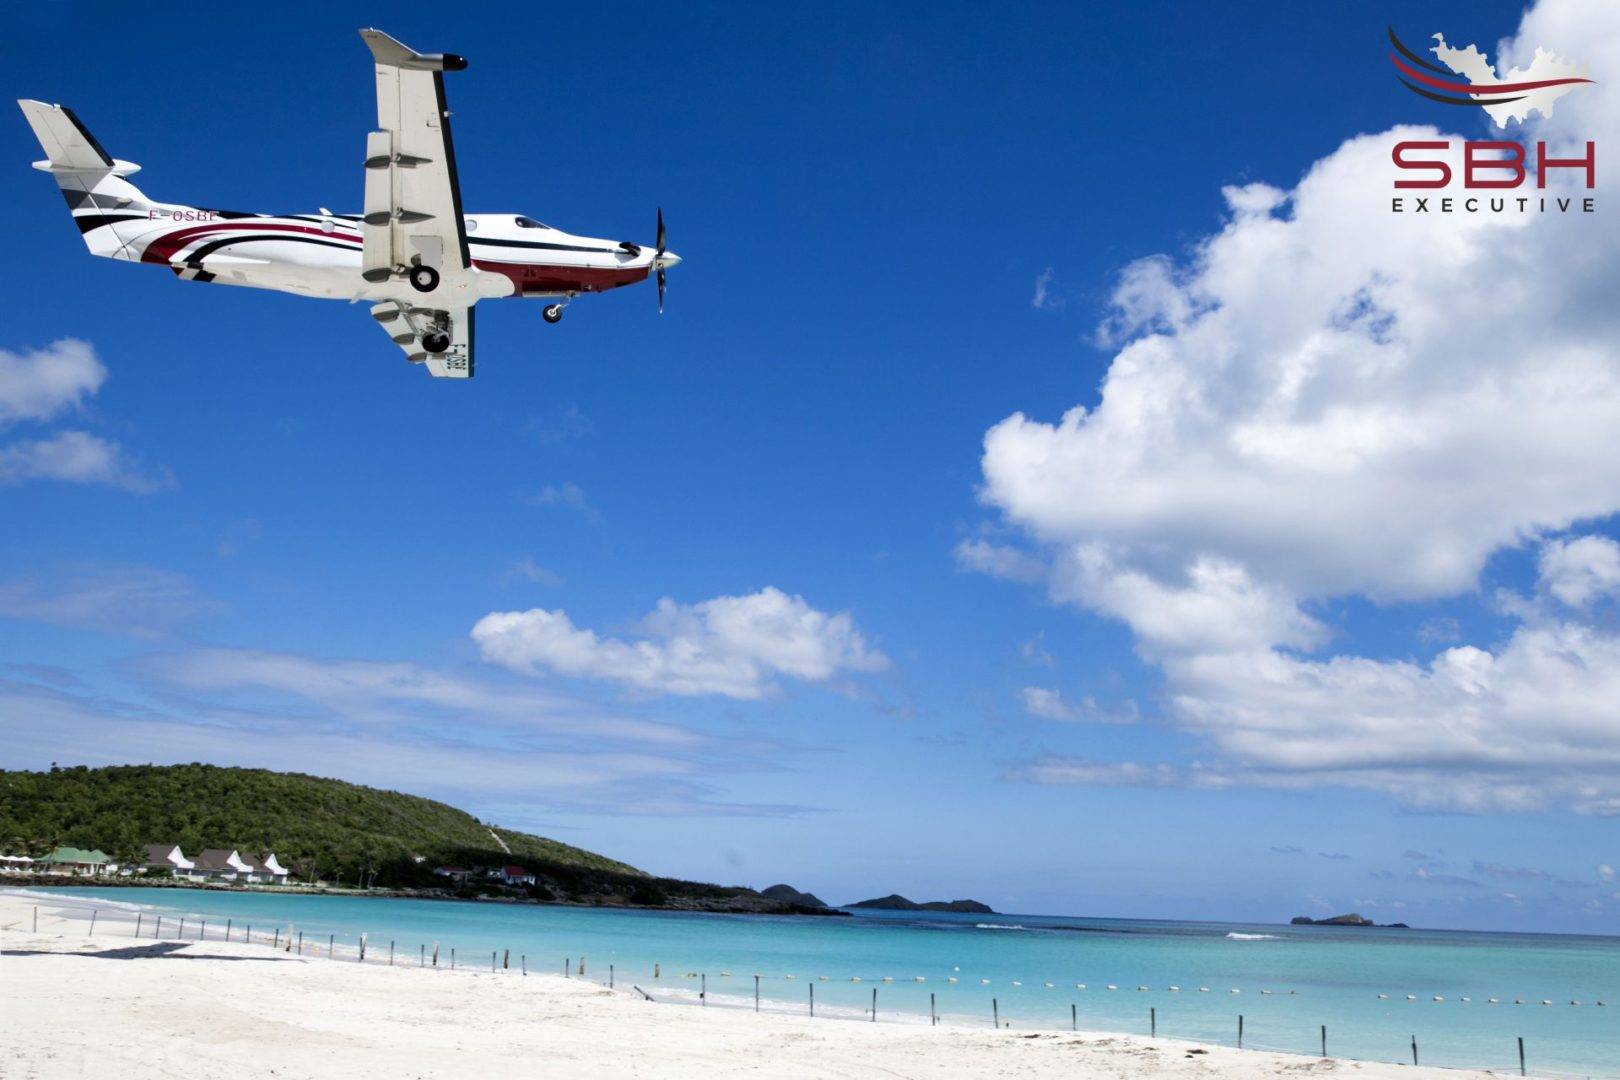 1-St-Barth-executive-Private-Charter-Flights-Airline-Airport.jpg